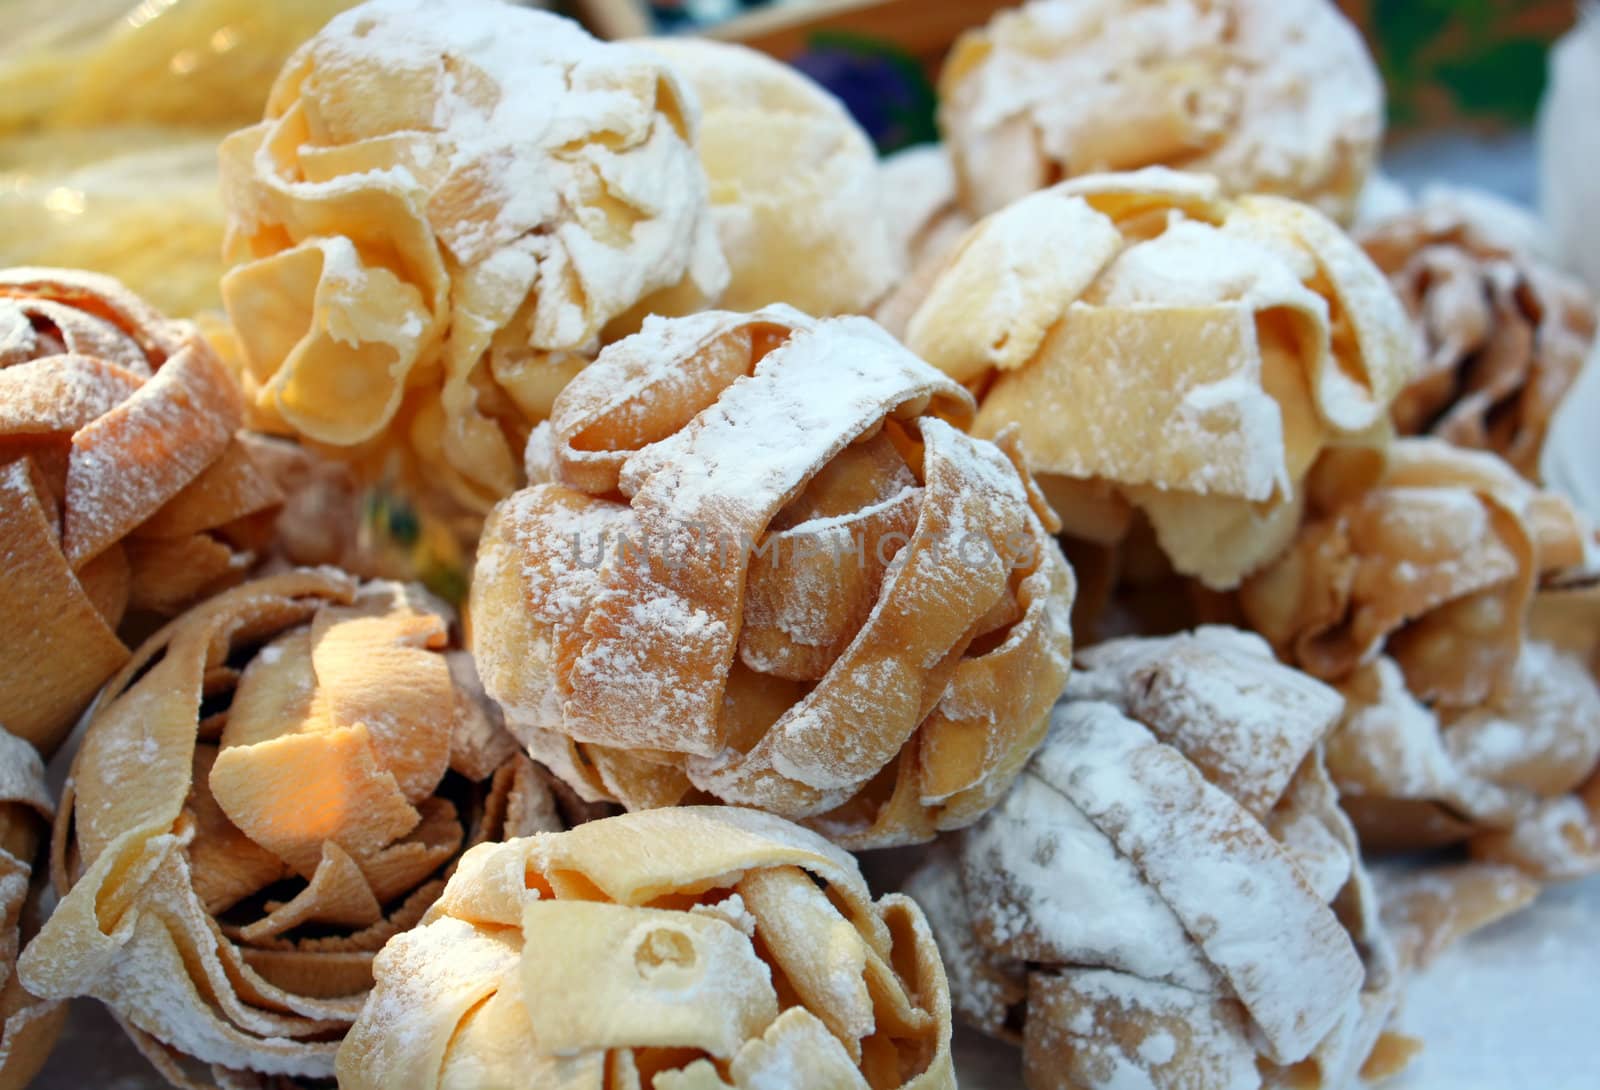 Ball shaped cookies made from domestic pasta with powder sugar